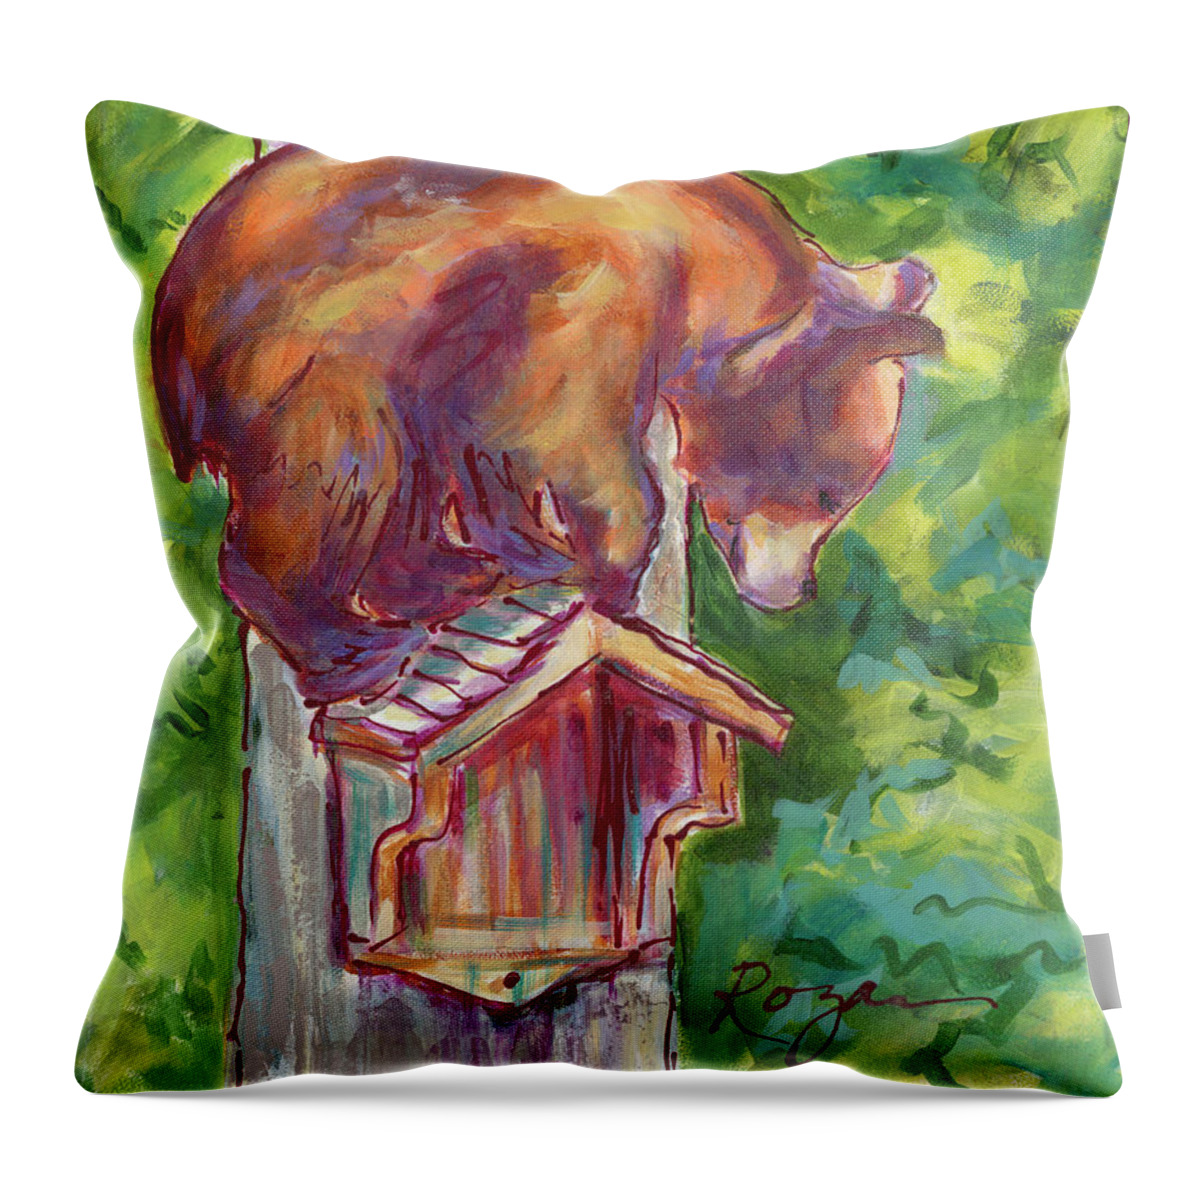 Bear Cub Throw Pillow featuring the painting House Sitter by Judy Rogan